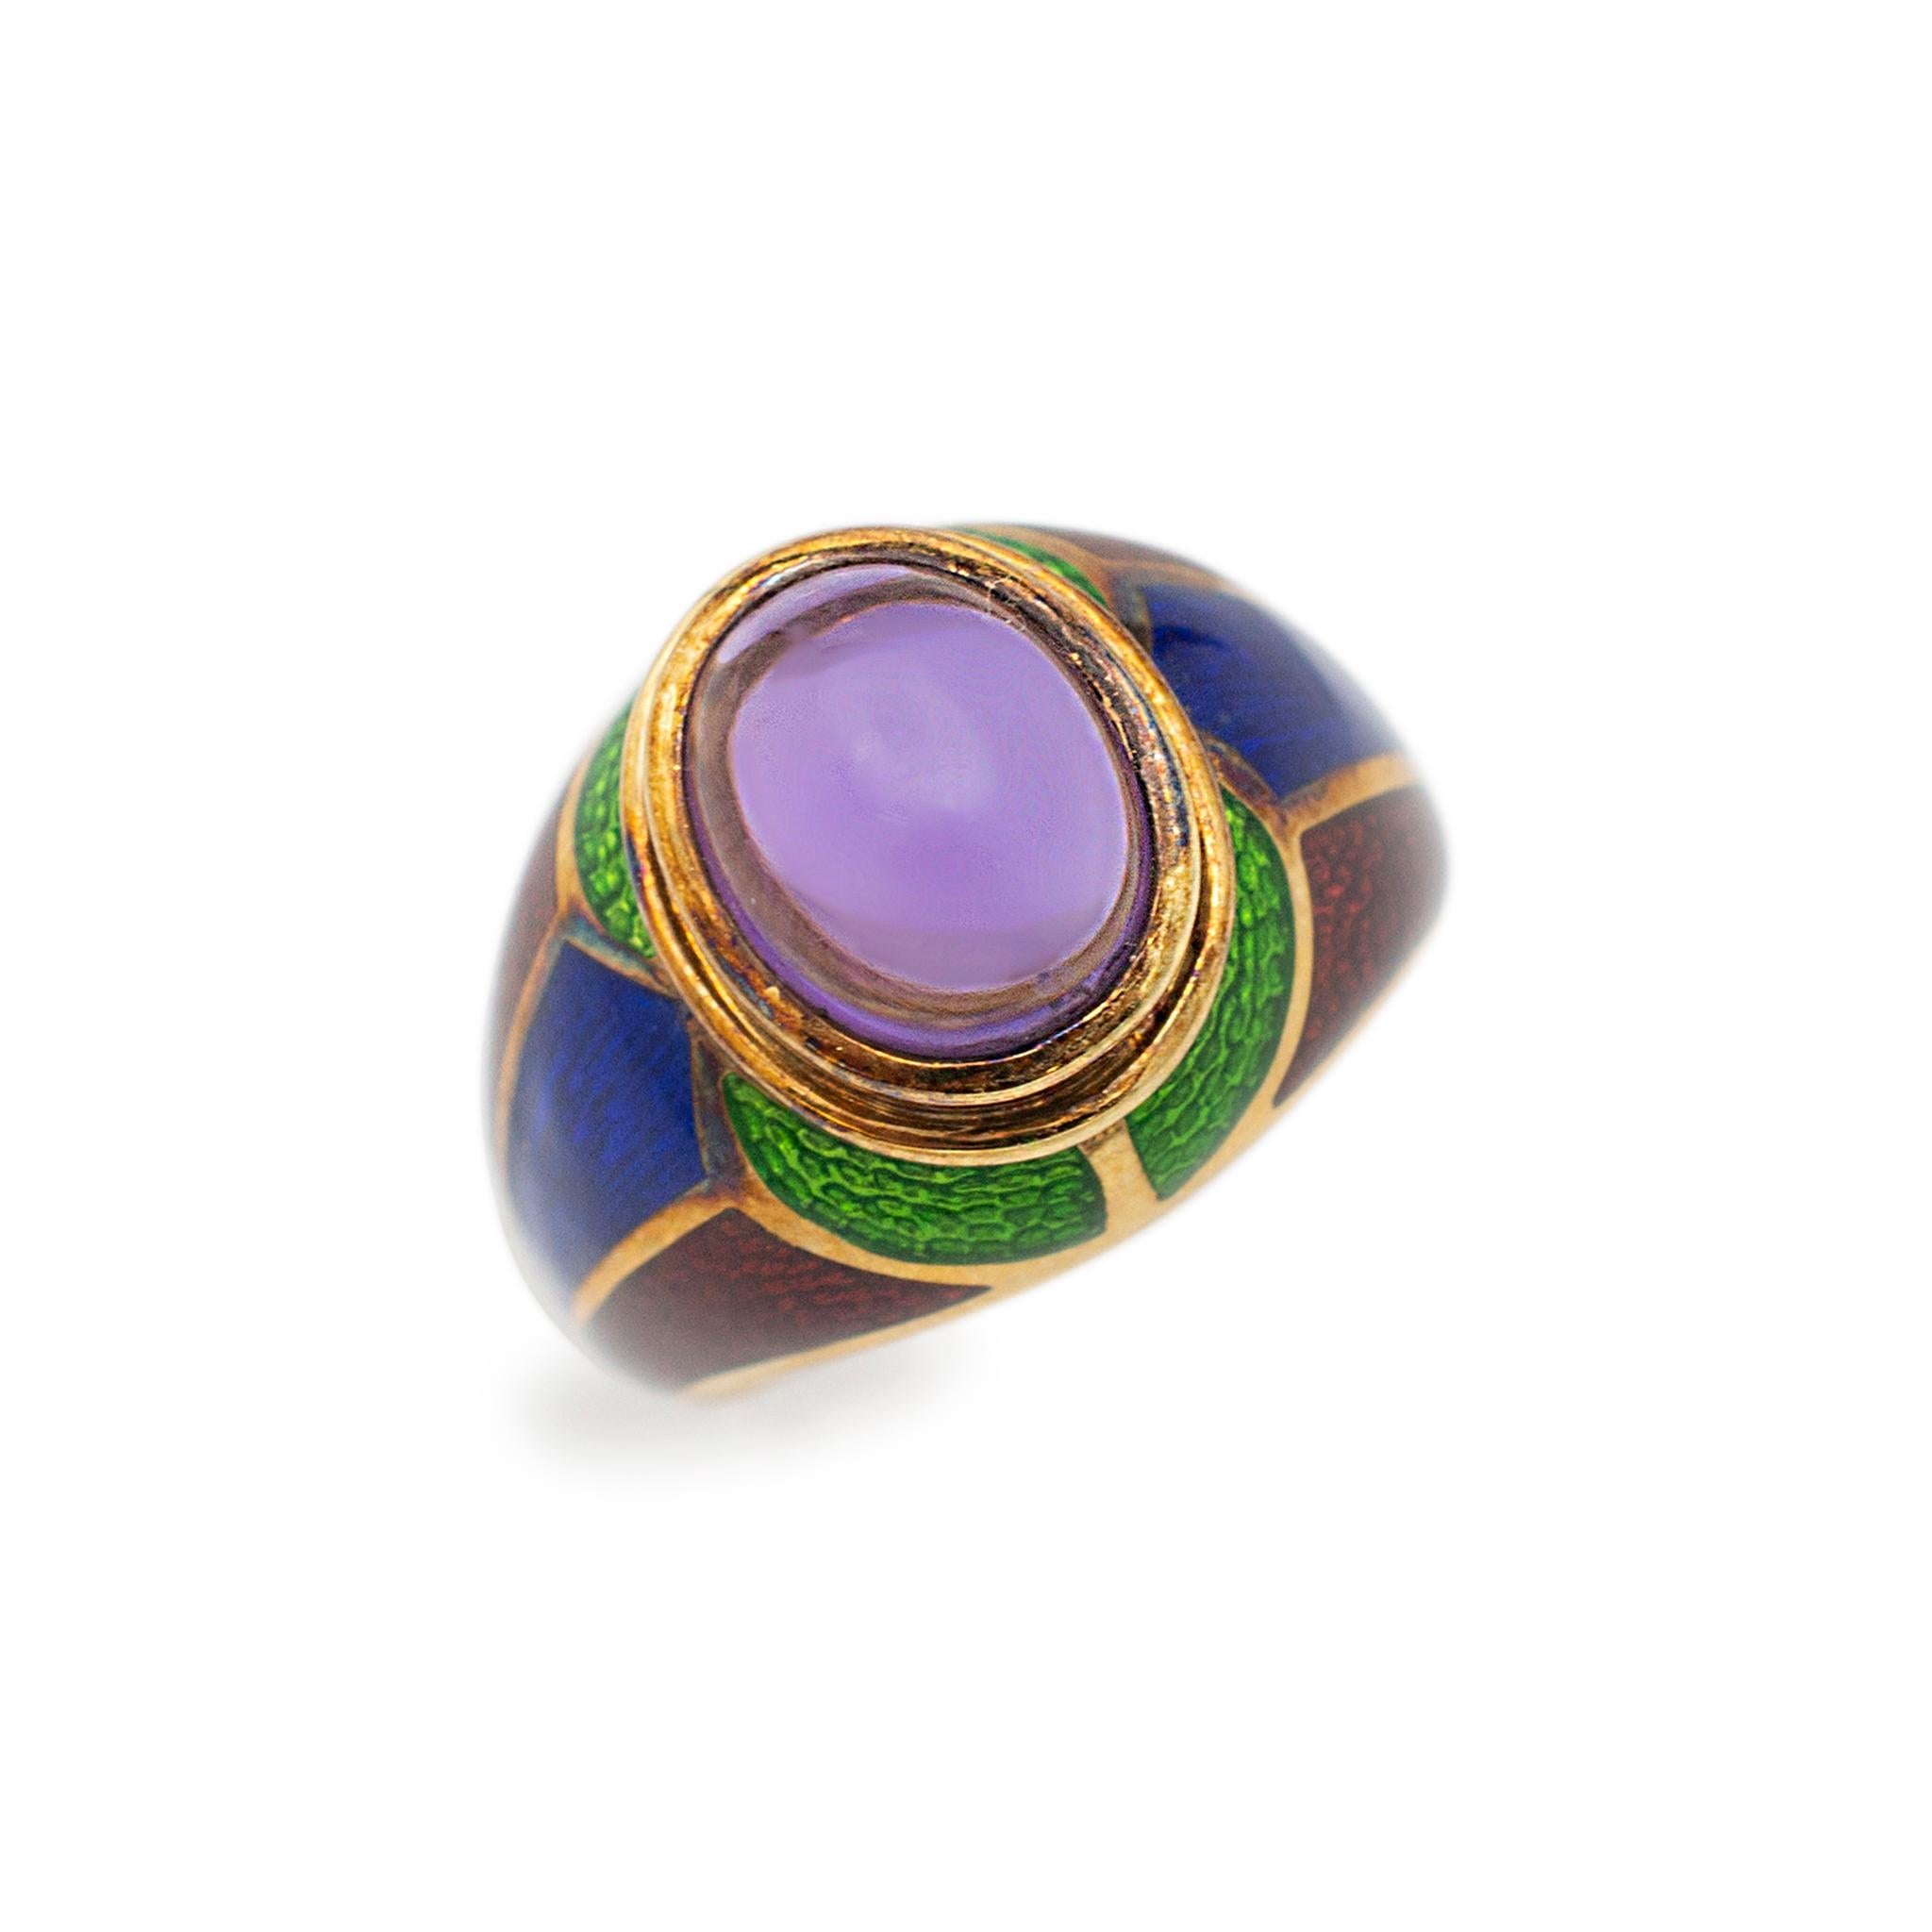 Gender: Ladies

Metal Type: 18K Yellow Gold & Enamel

Size: 6

Shank Maximum Width: 14.65 mm tapering to 4.15 mm

Weight: 10.28 grams

Head Length: 11.55 mm

Head Width: 9.55 mm 

Ladies handmade 18K yellow gold amethyst vintage cocktail ring with a